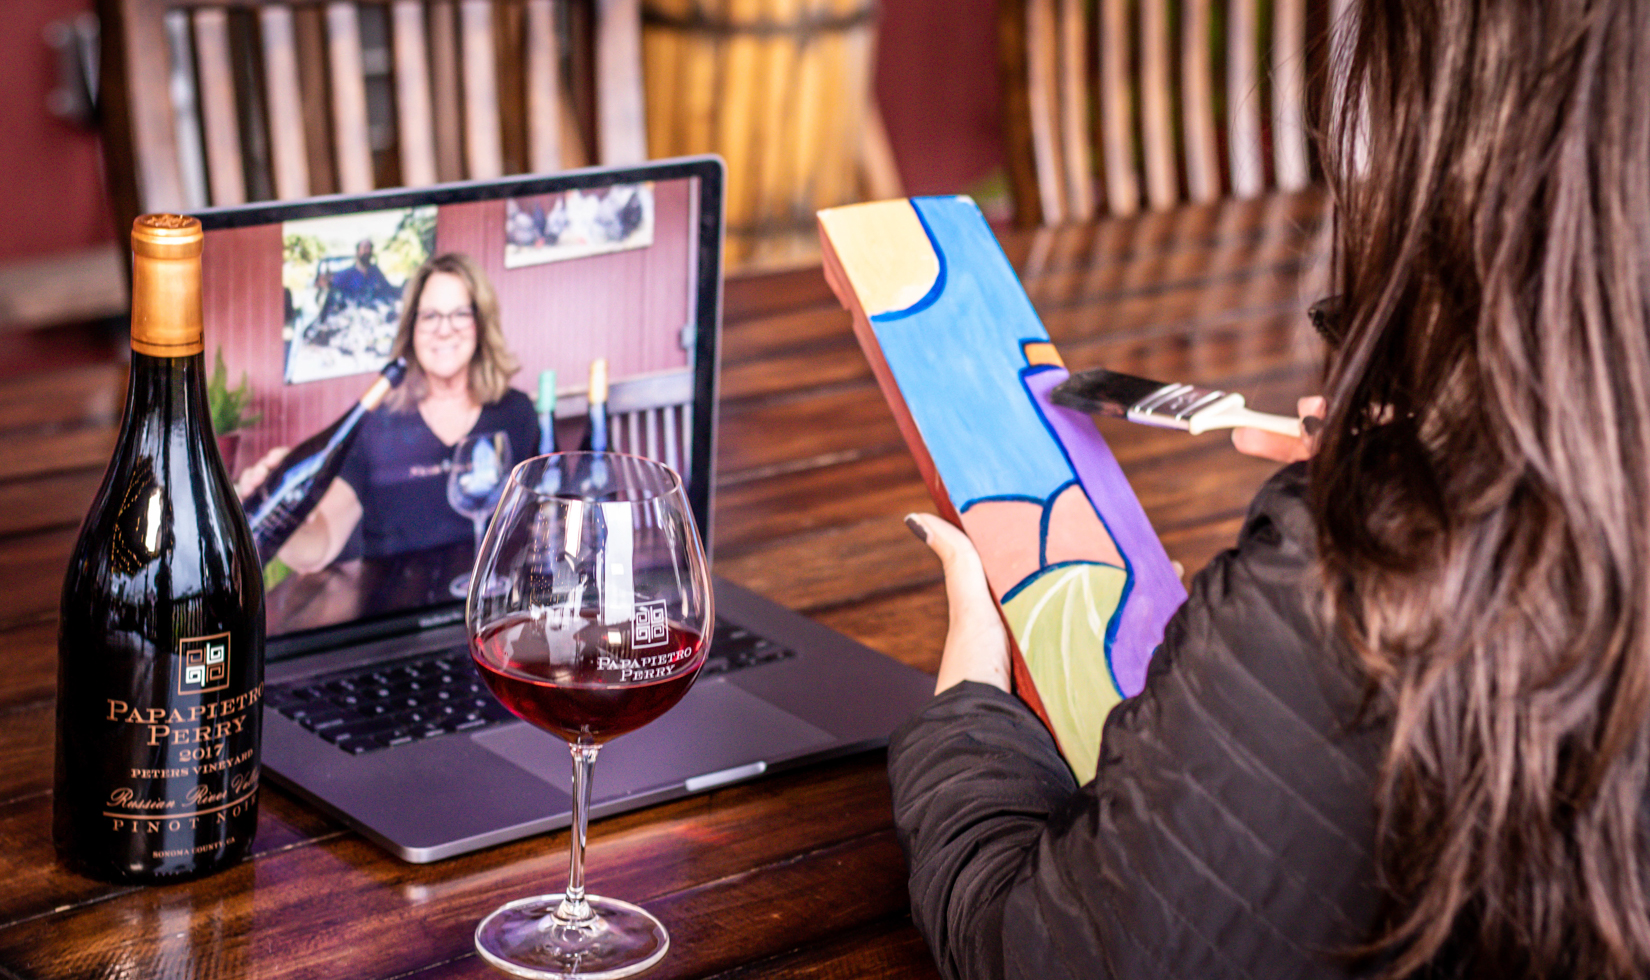 virtual wine tasting and painting class with laptop and wine glasses